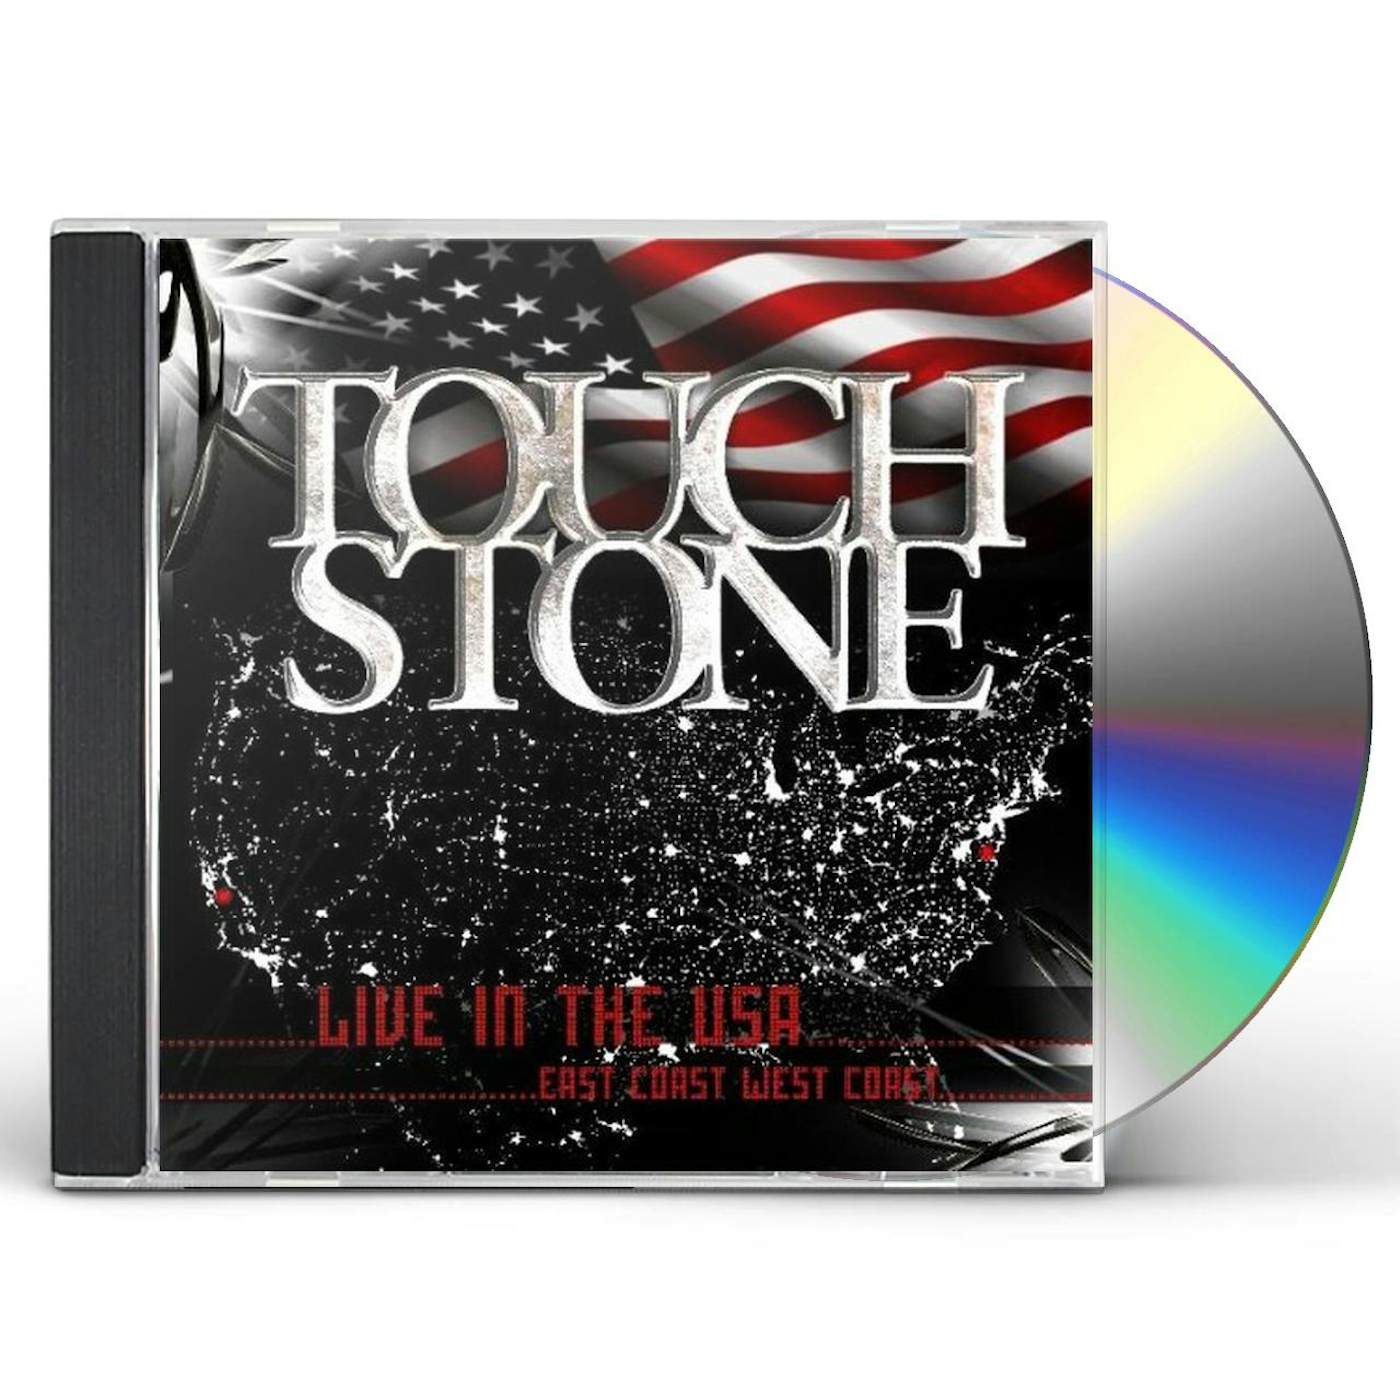 Touchstone LIVE IN THE USA CD